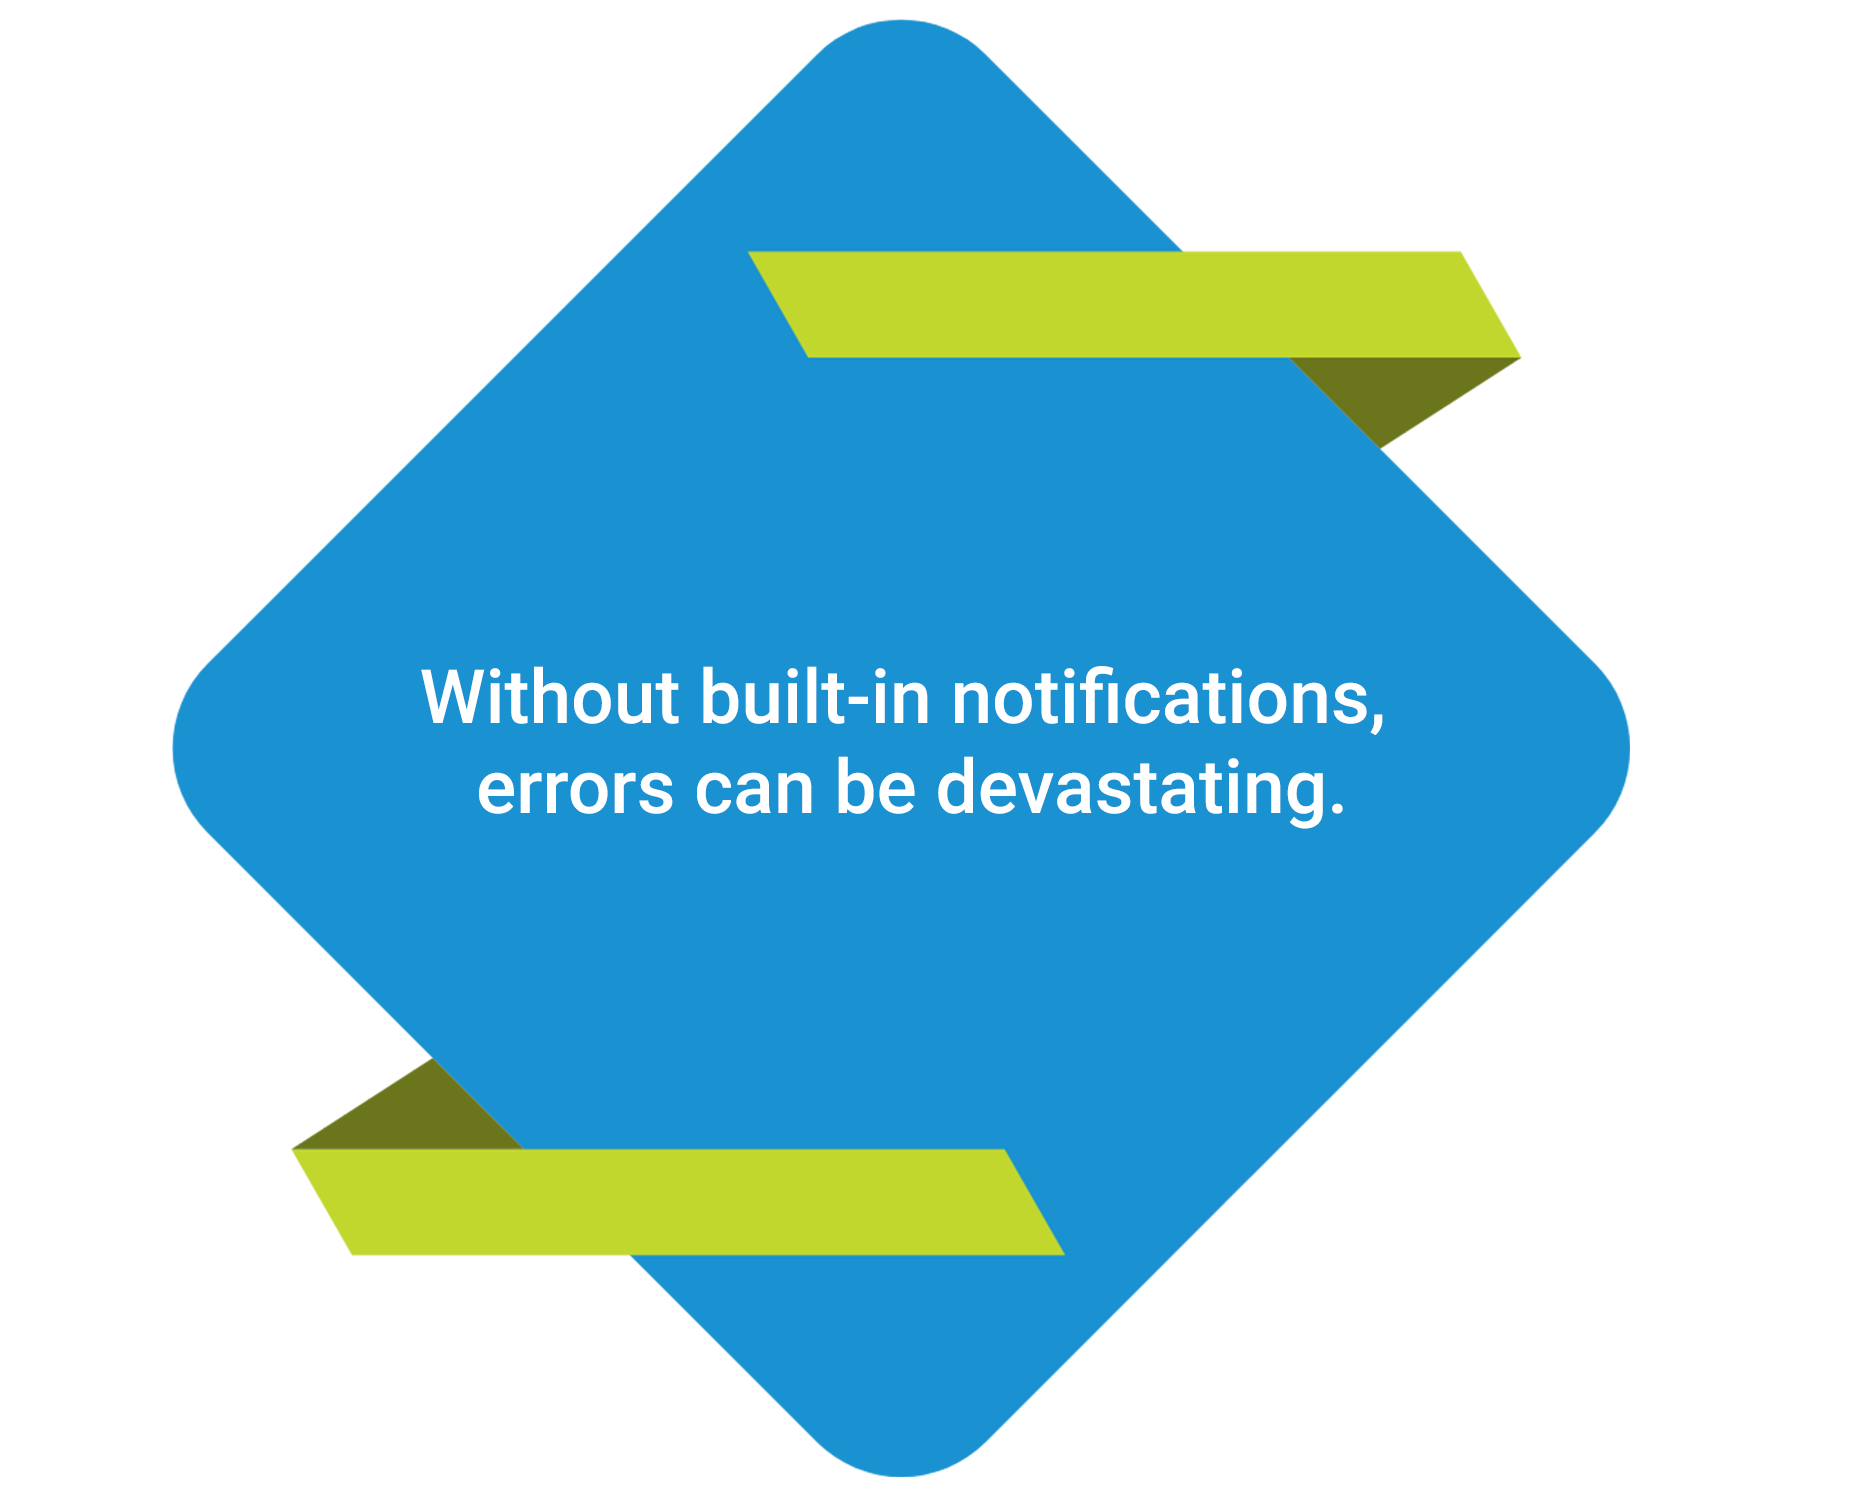 Without built-in notifications, errors can be devastating.